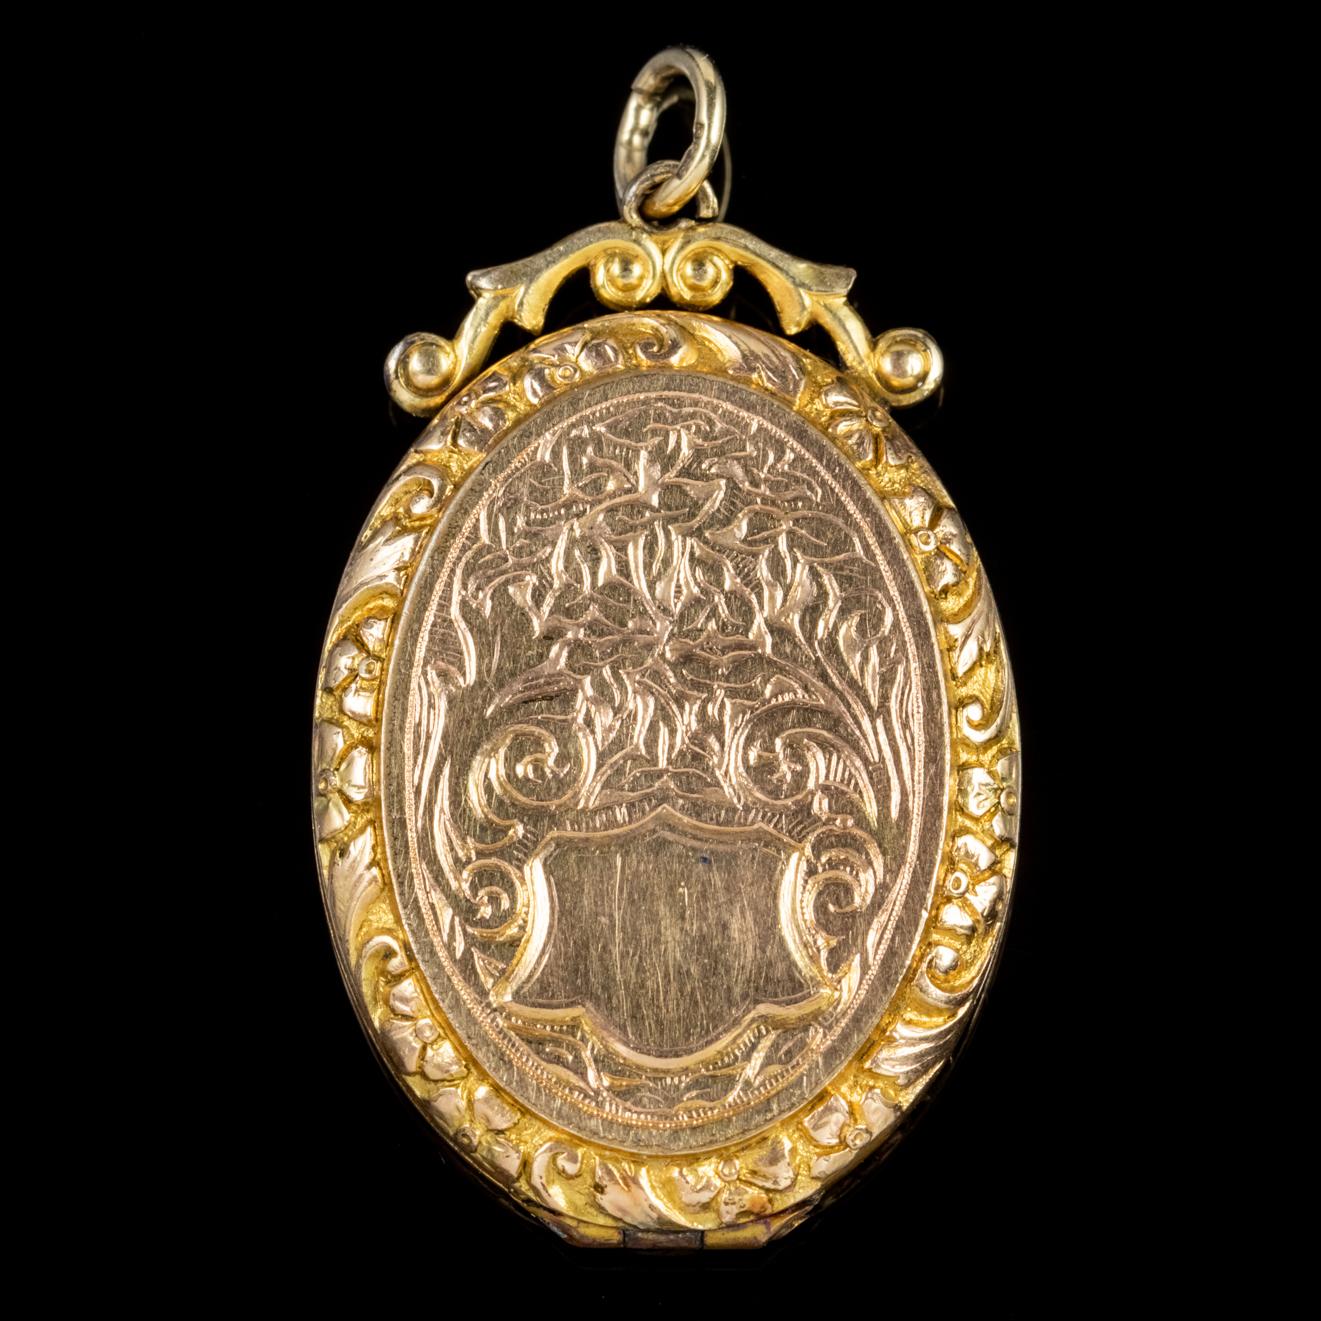 A beautiful antique Victorian locket with delicate floral engravings on both faces. It is a great example of Victorian craftsmanship modelled in 9ct Yellow Gold back and front.

The piece opens and closes vertically, with the hinge located at the